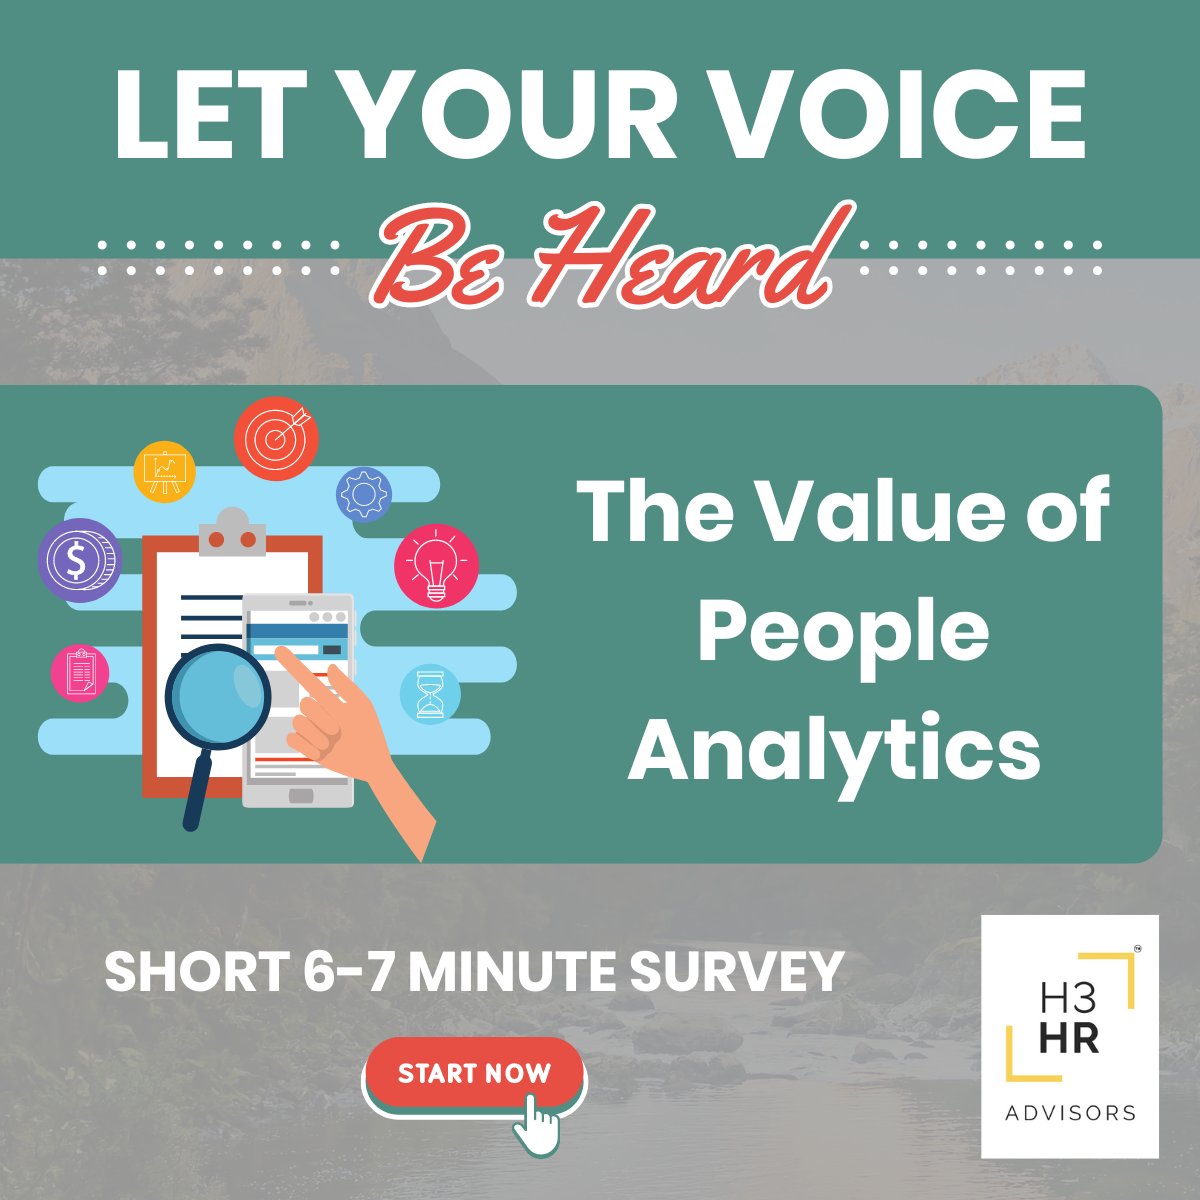 Join H3 HR Advisors today to share your insights to help improve our understanding of people and their work experiences and how we can use technology to make the working world better for everyone. #HR #HRTech #PeopleAnalytics #workplace

corexmsb3v52zzj4mtx2.qualtrics.com/jfe/form/SV_6l…